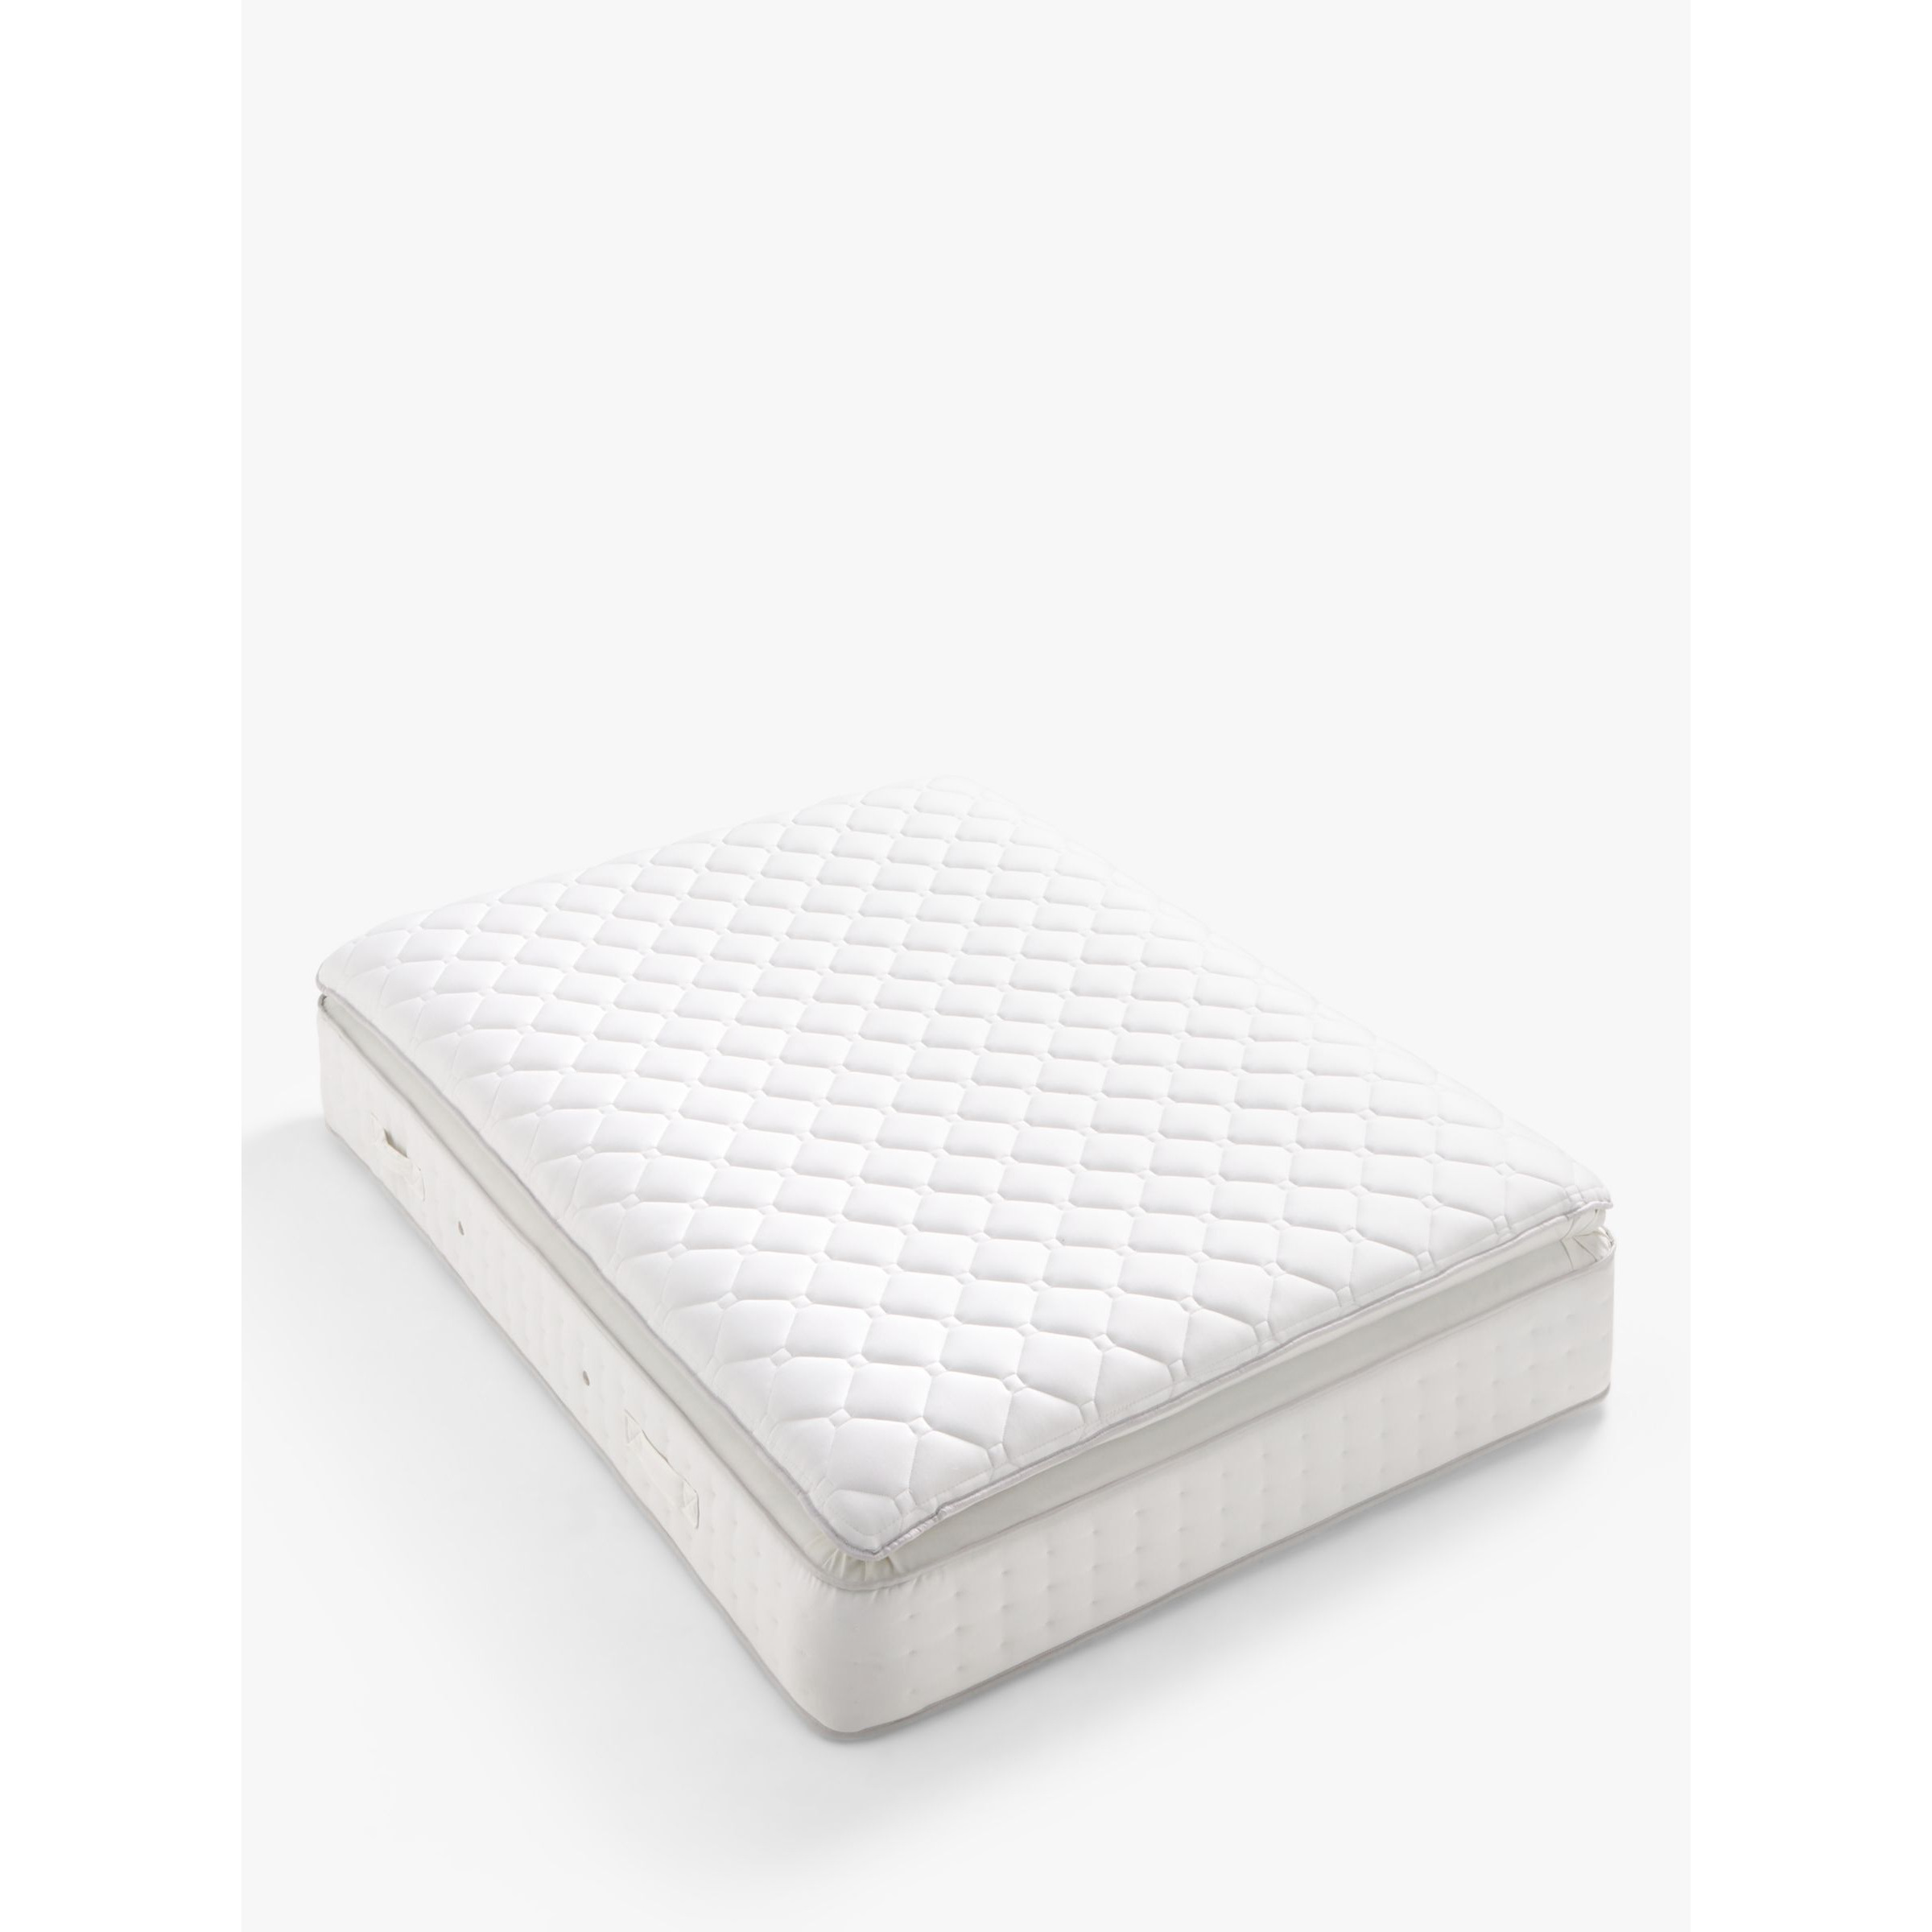 John Lewis Ultra Comfort Collection NO. 2 Pocket Spring Mattress, Medium/Firm Tension, Double - image 1